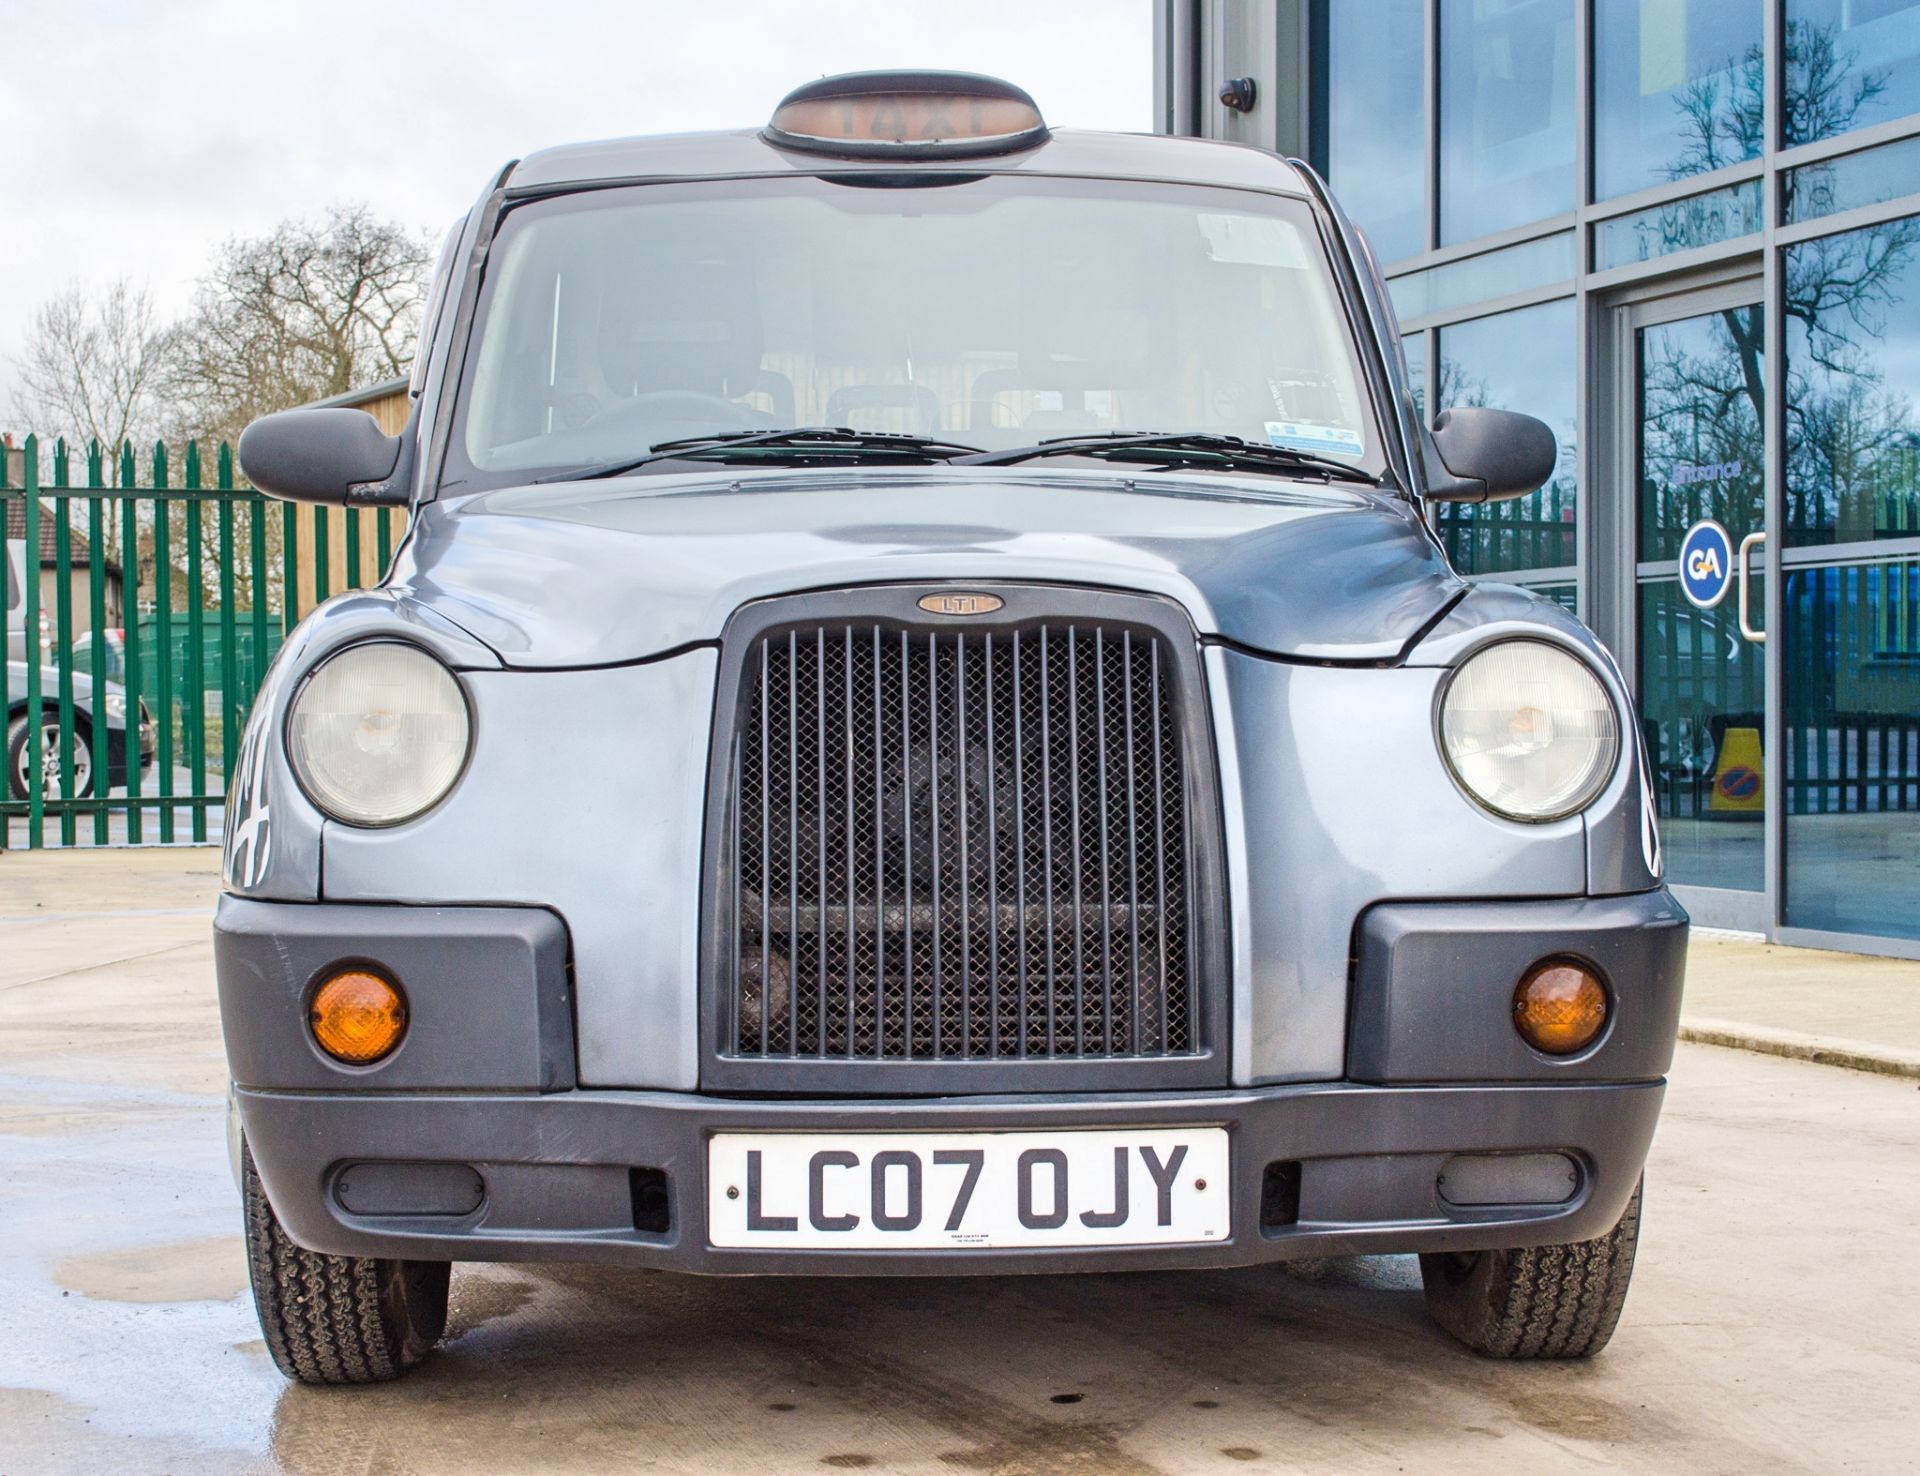 2007 London Taxi Int TX4 2499cc Auto - Image 9 of 49